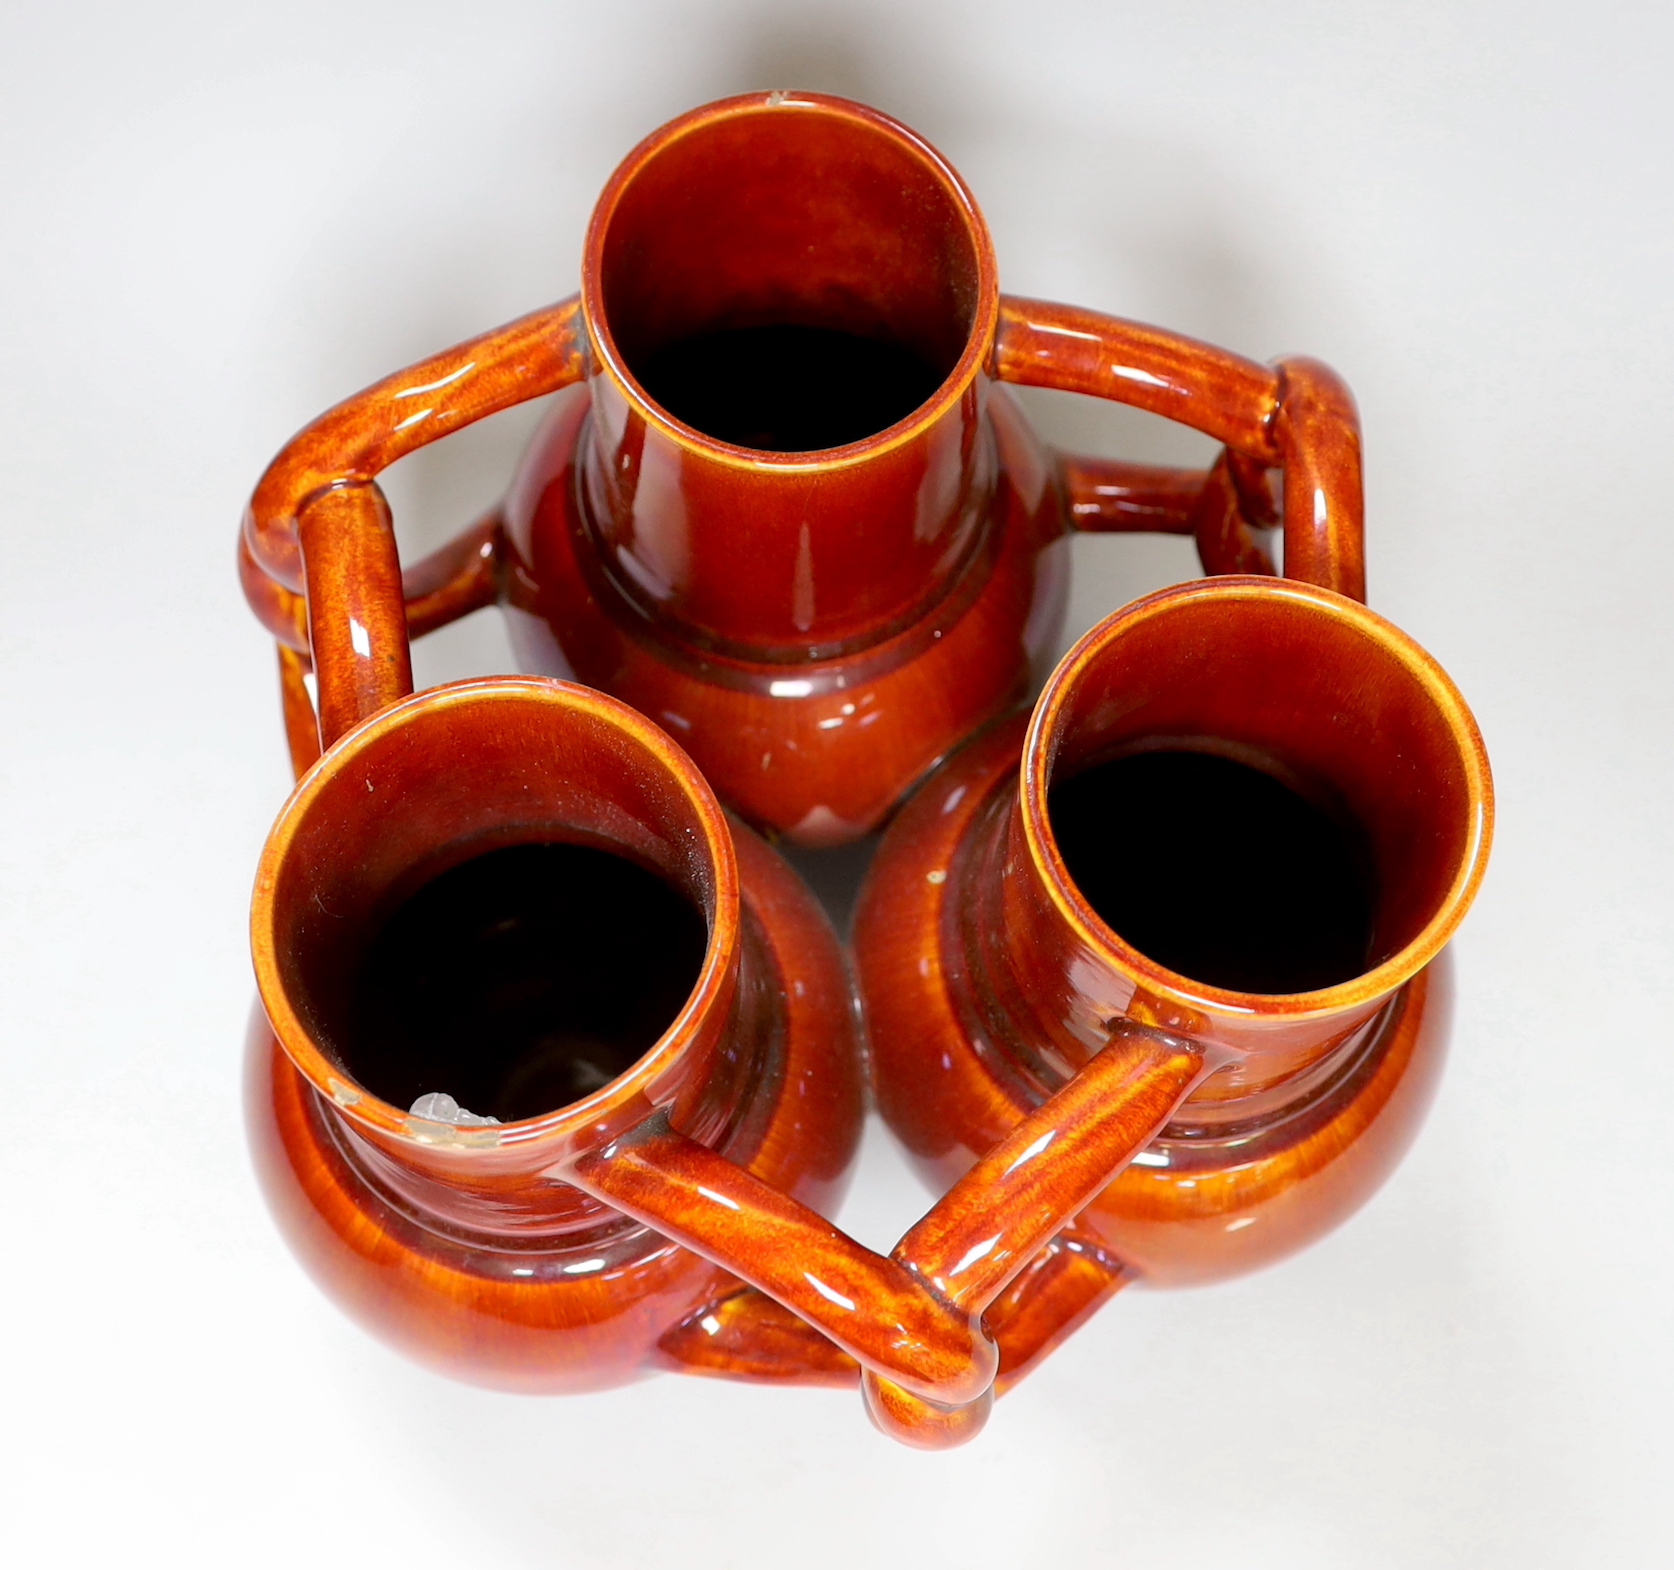 A Burmantofts Pottery three section fuddling cup with interwoven handles in dark burnt orange, - Image 5 of 6